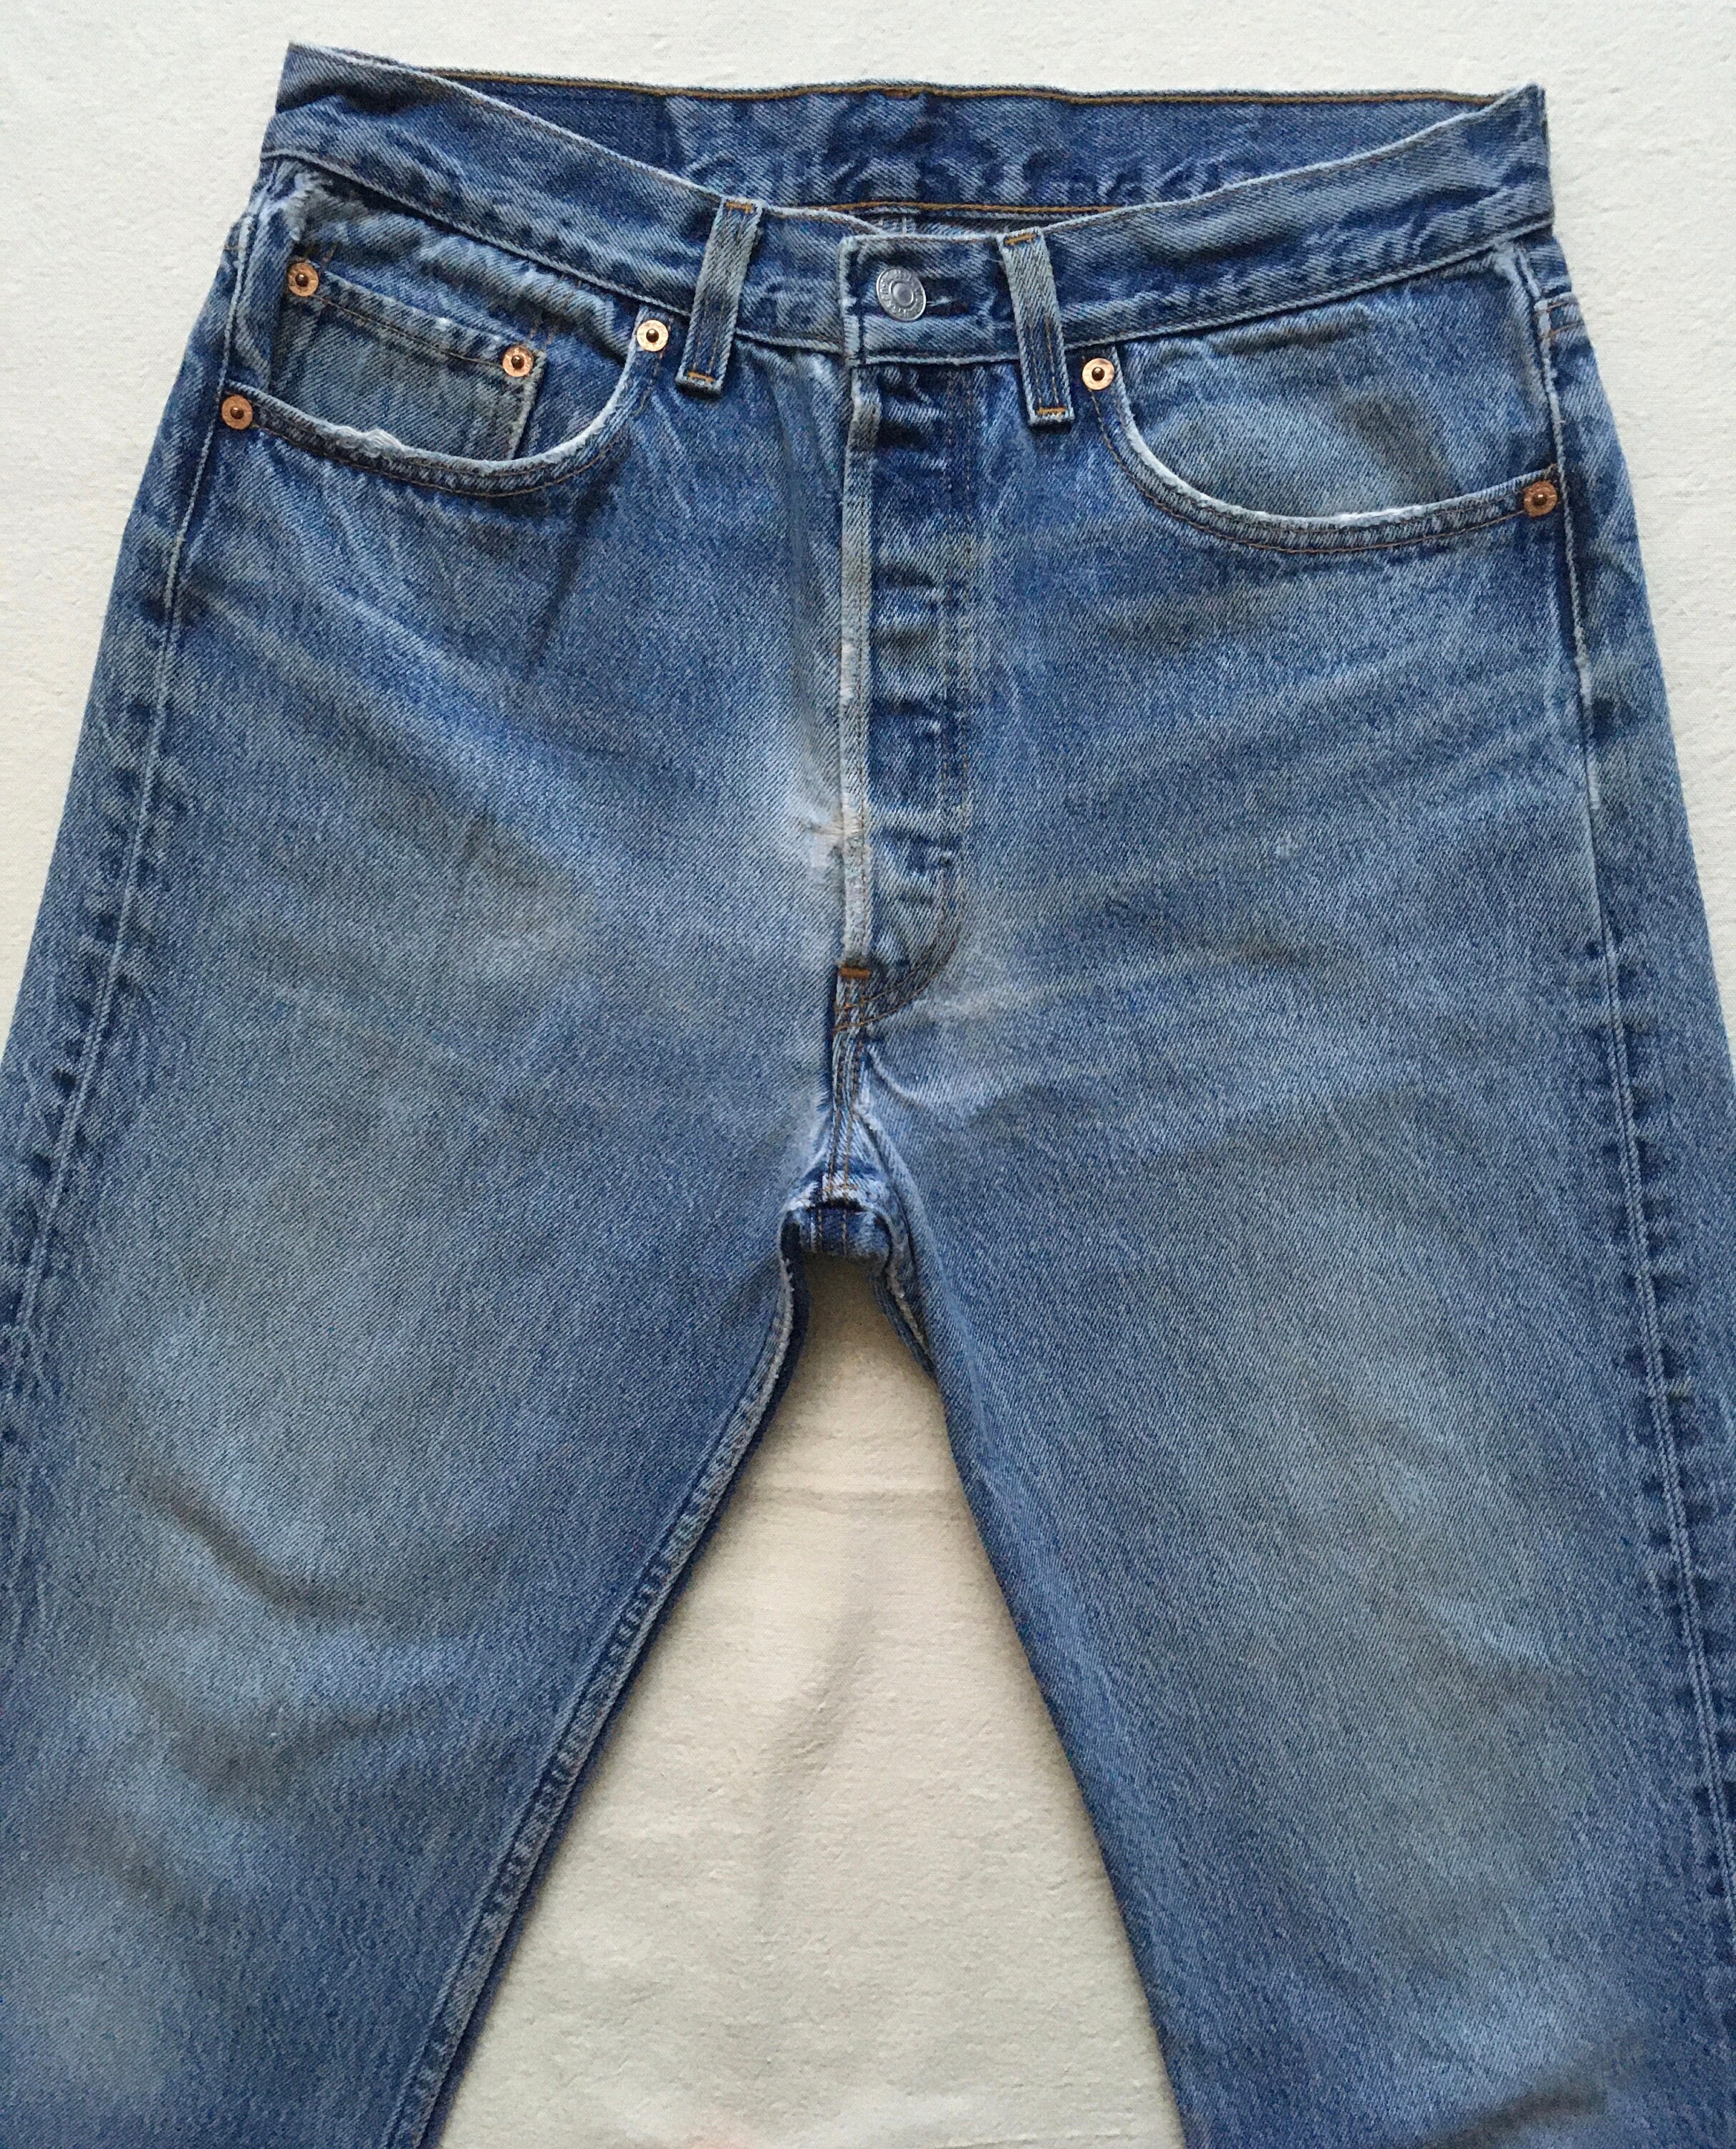 Vintage Levis 501 Made in Usa Blue Jeans 32 X 29 - Etsy